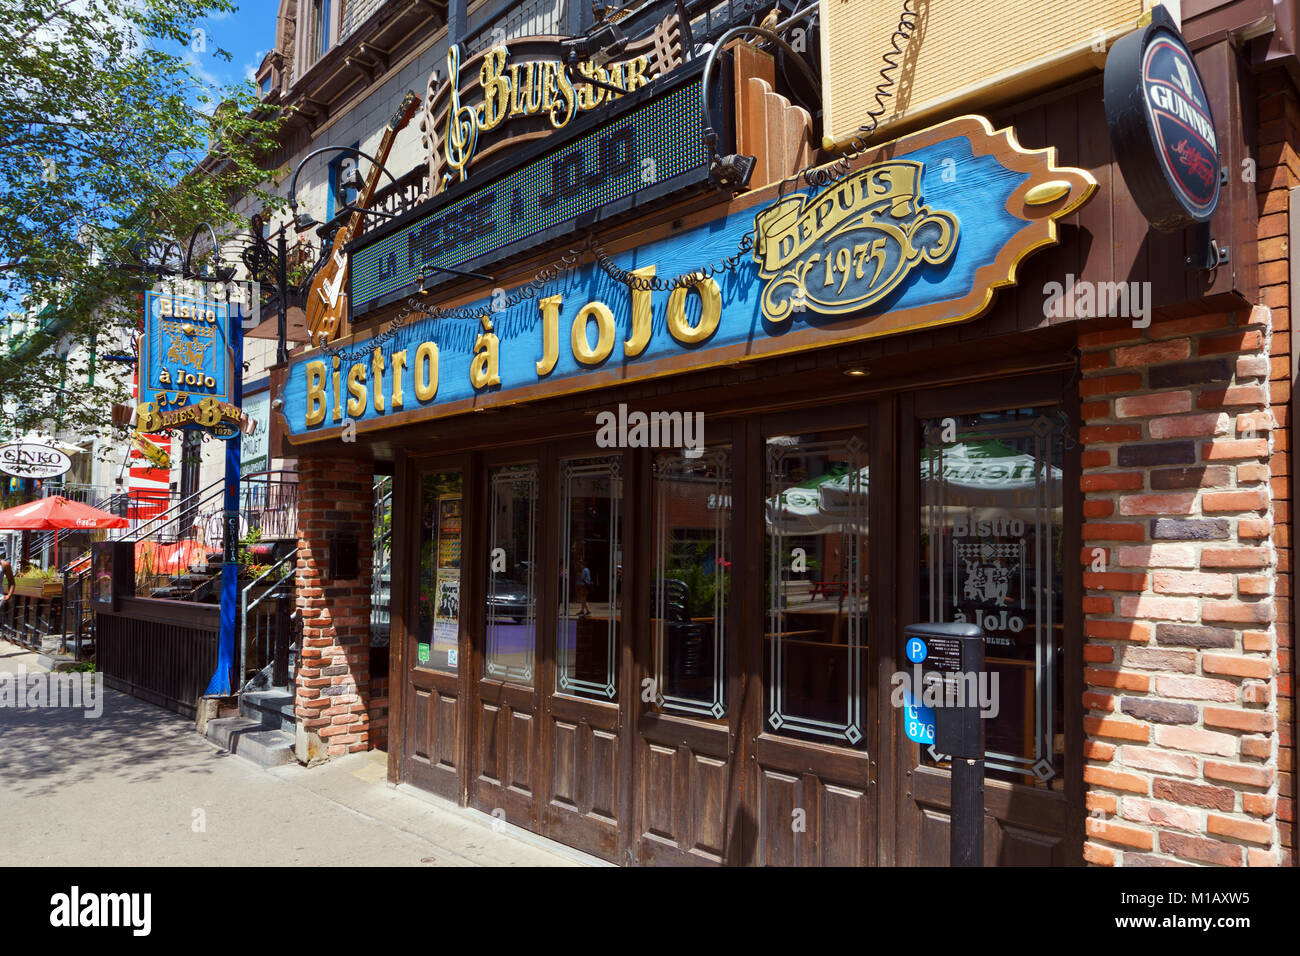 Bistro à Jojo, a famous blues bar on St-Denis street, Montreal, province of Quebec, Canada. Stock Photo